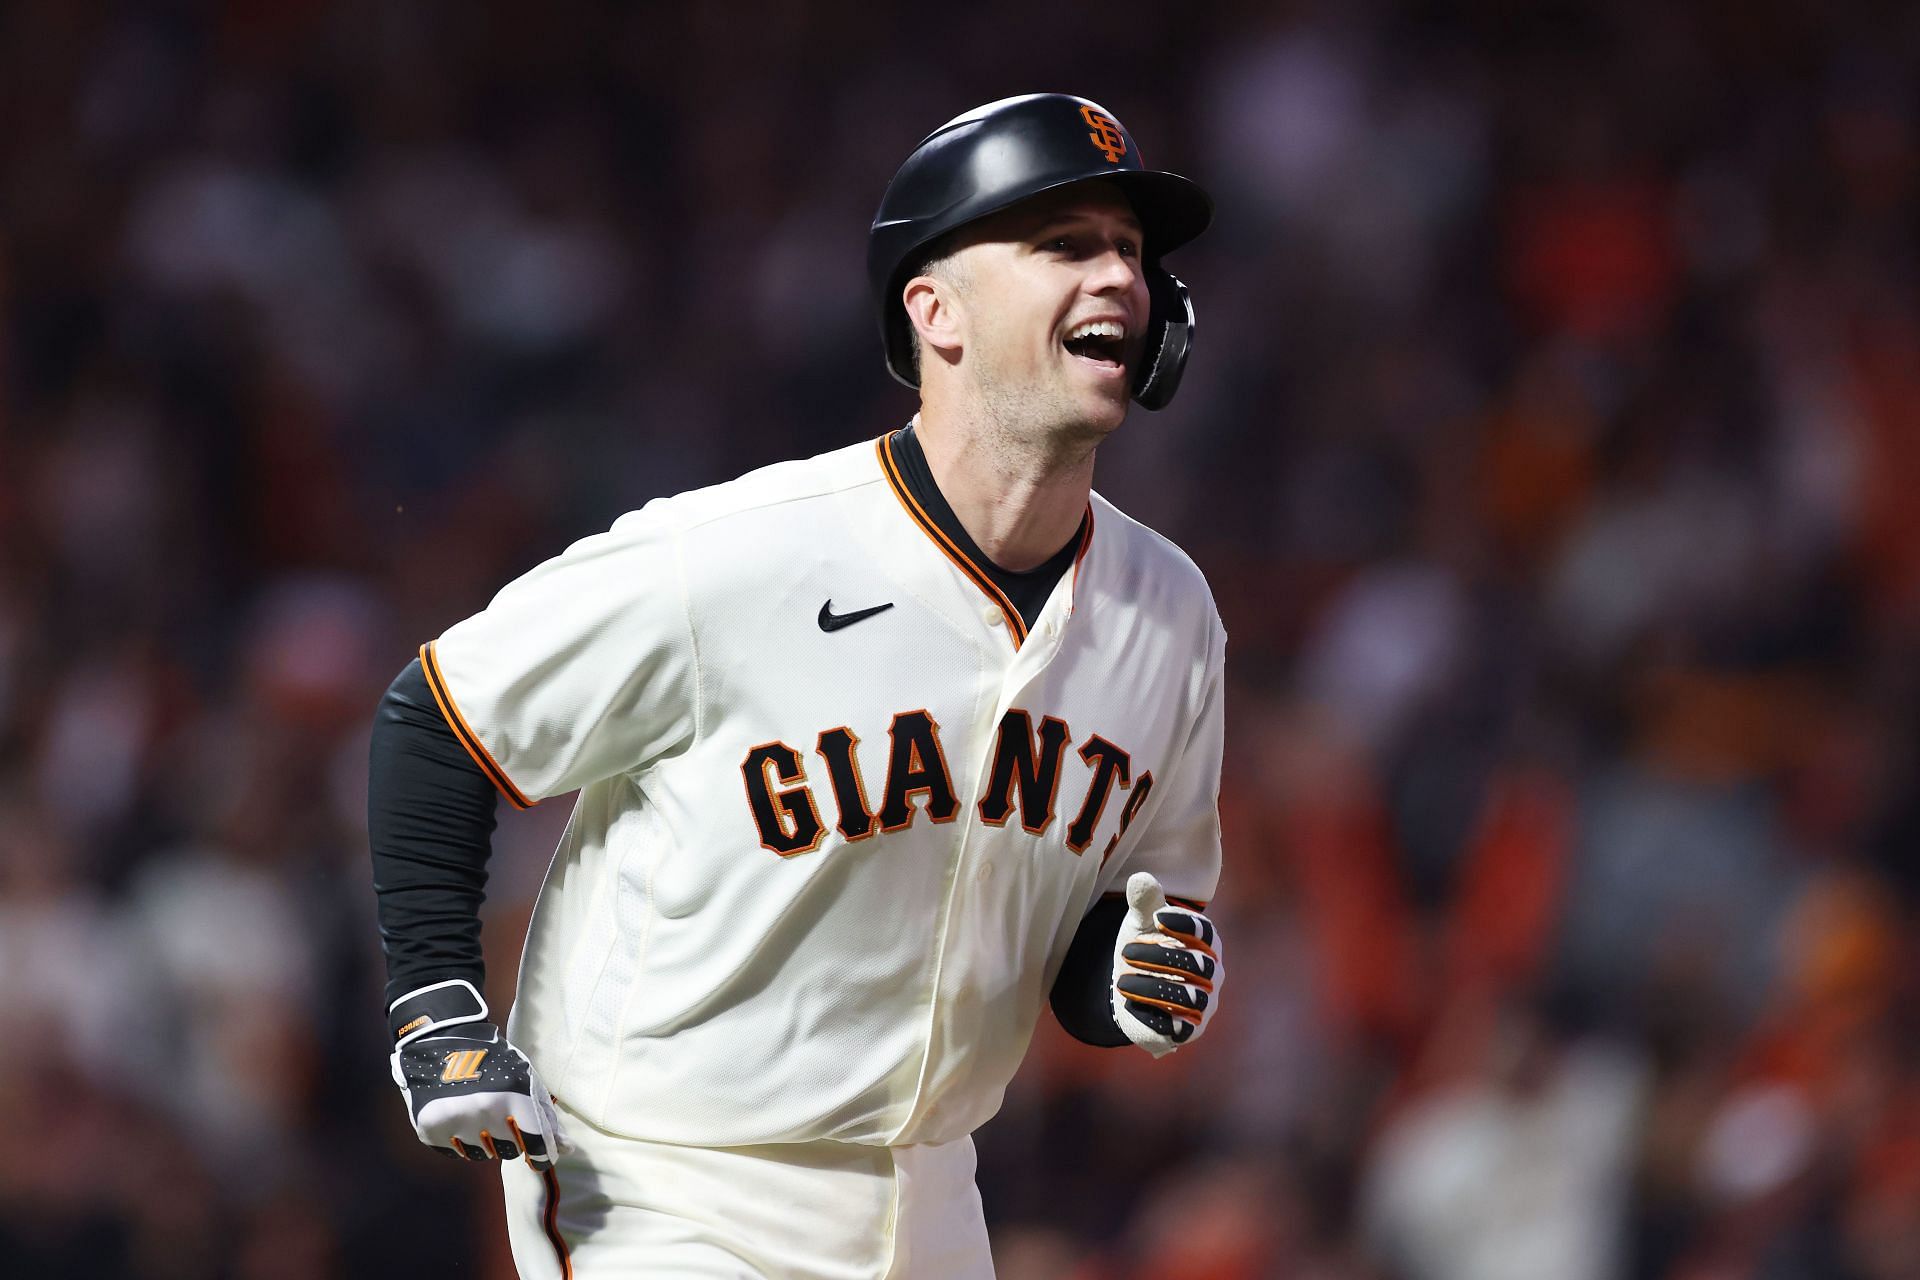 Which Giants players have won the Gold Glove? MLB Immaculate